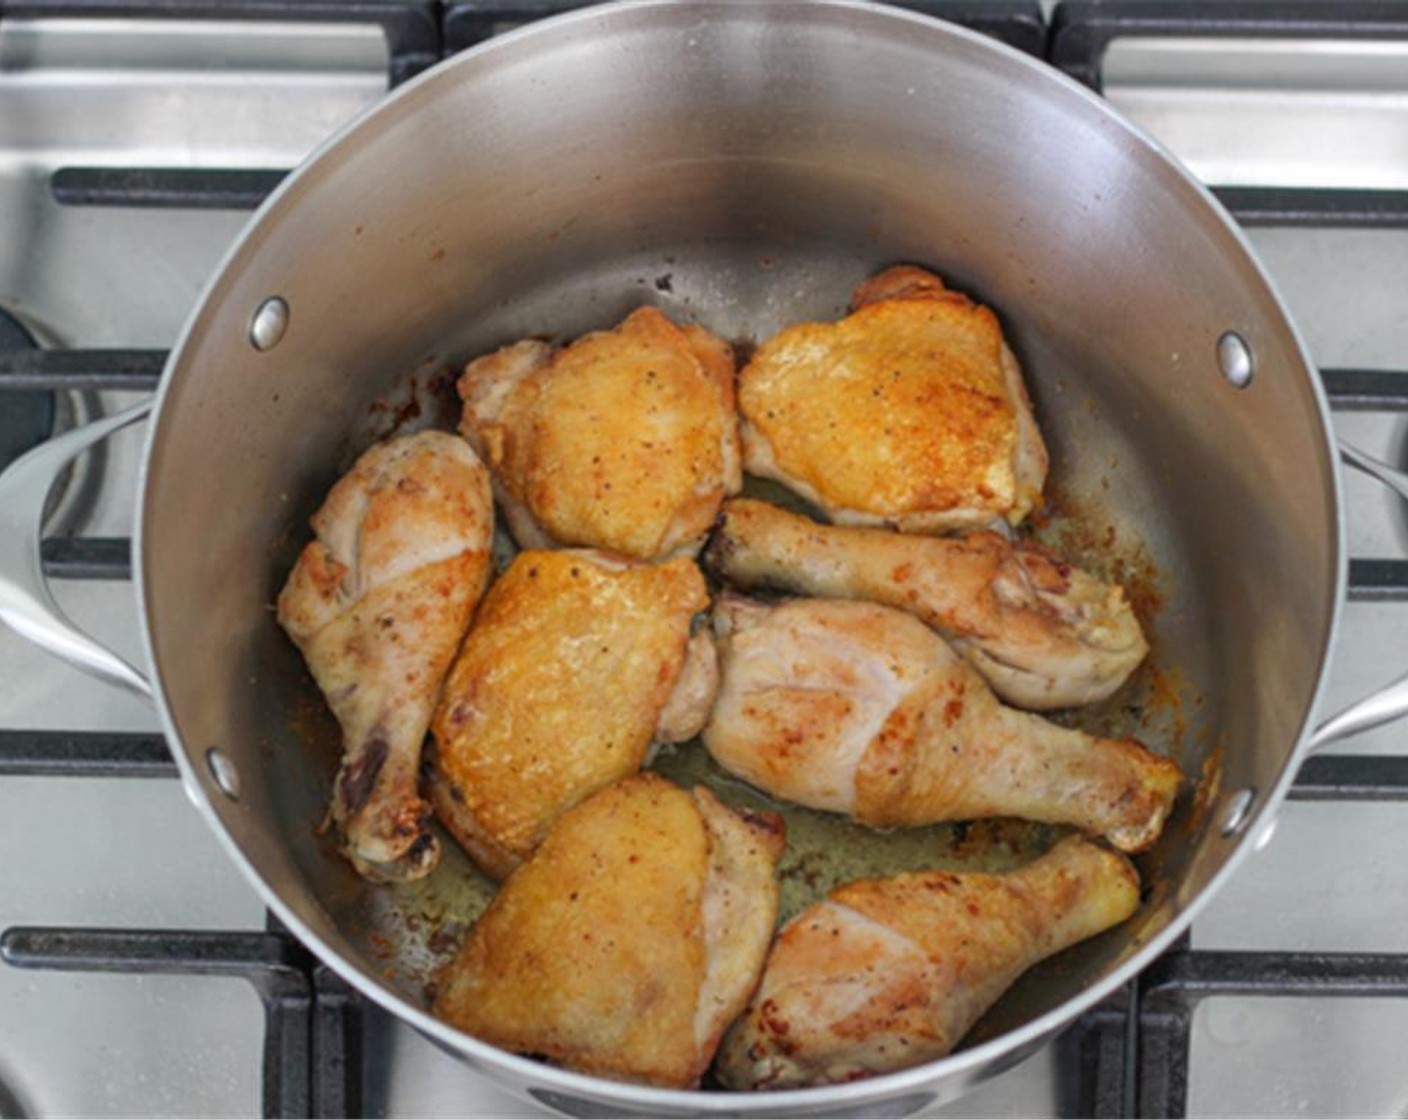 step 3 Heat the Oil (1 Tbsp) on high heat until smoking hot in a large and deep skillet or dutch oven. Brown the chicken on both sides really well until golden brown, about 5-8 minutes on both sides.